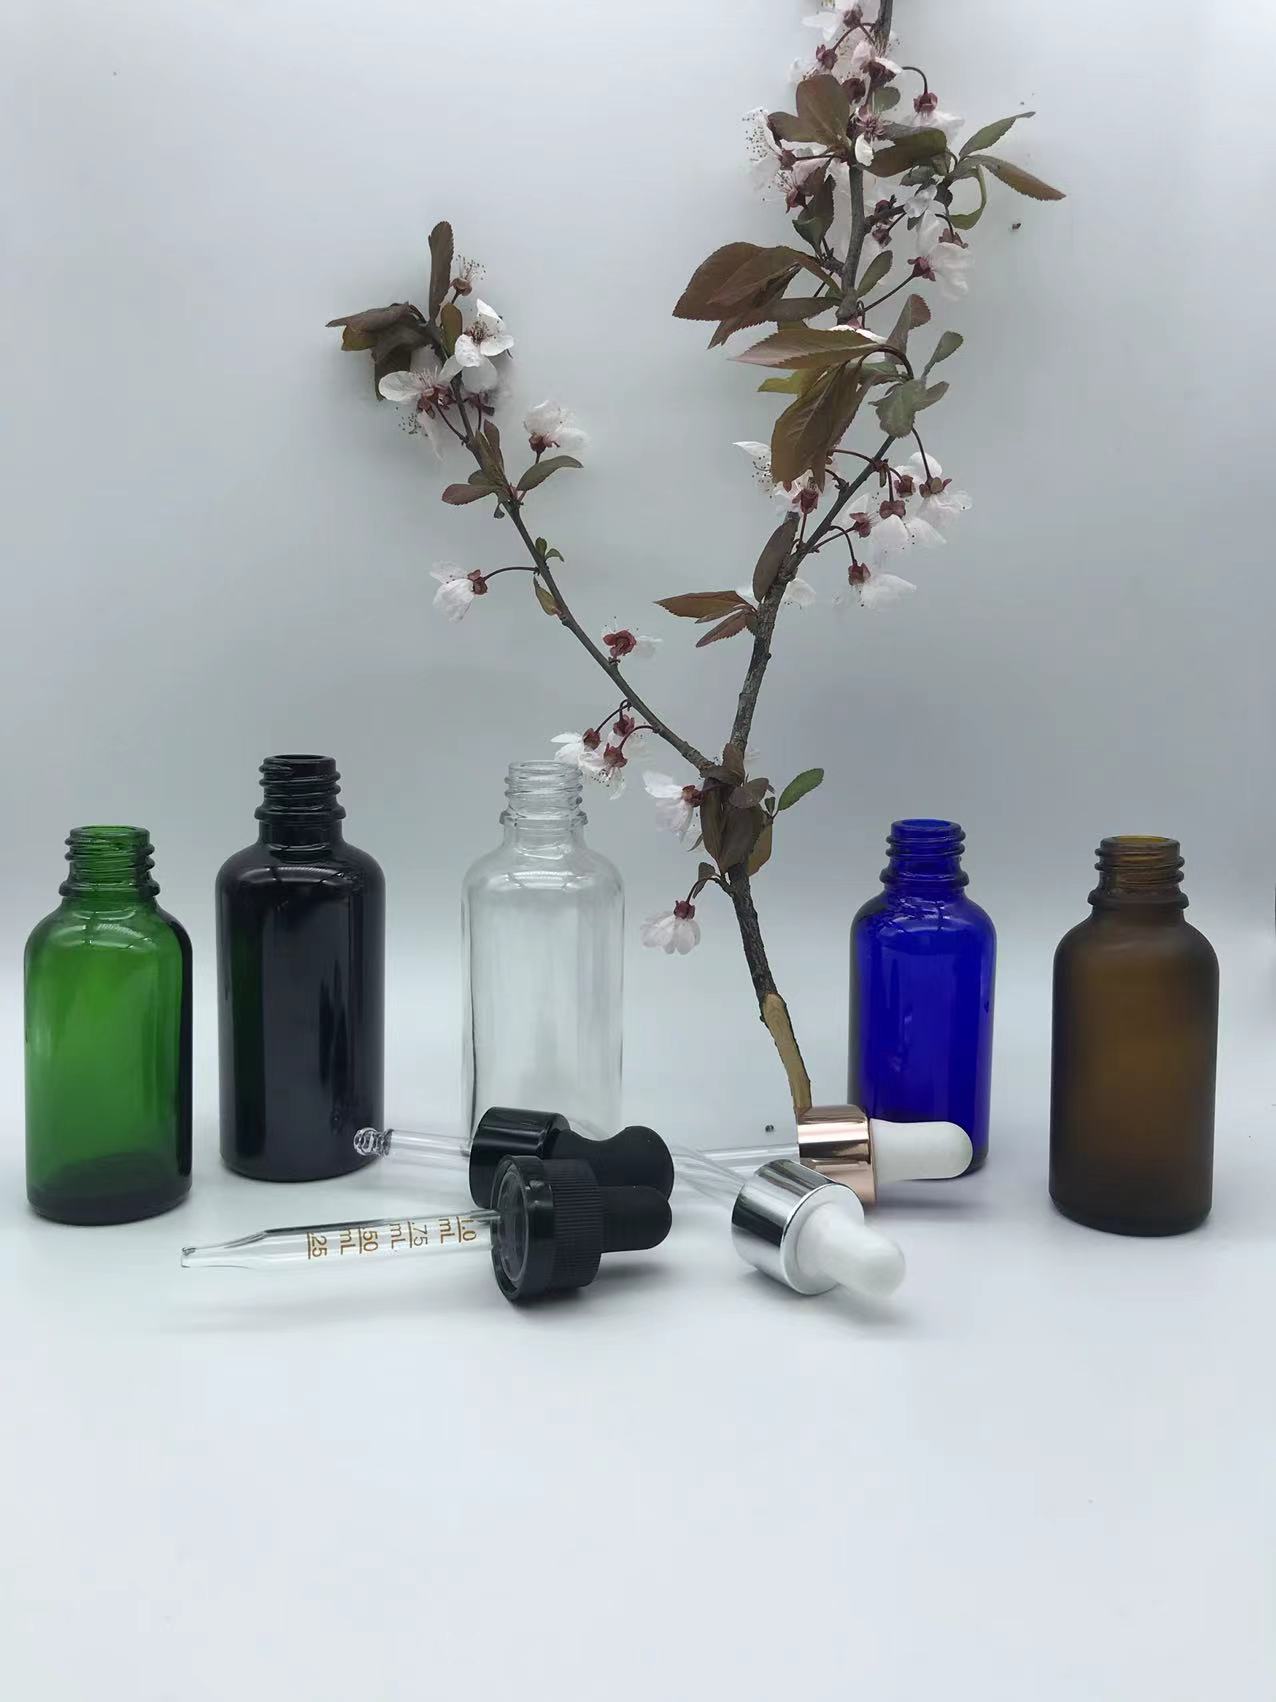 glass bottle sizes ranging from 5-100ml